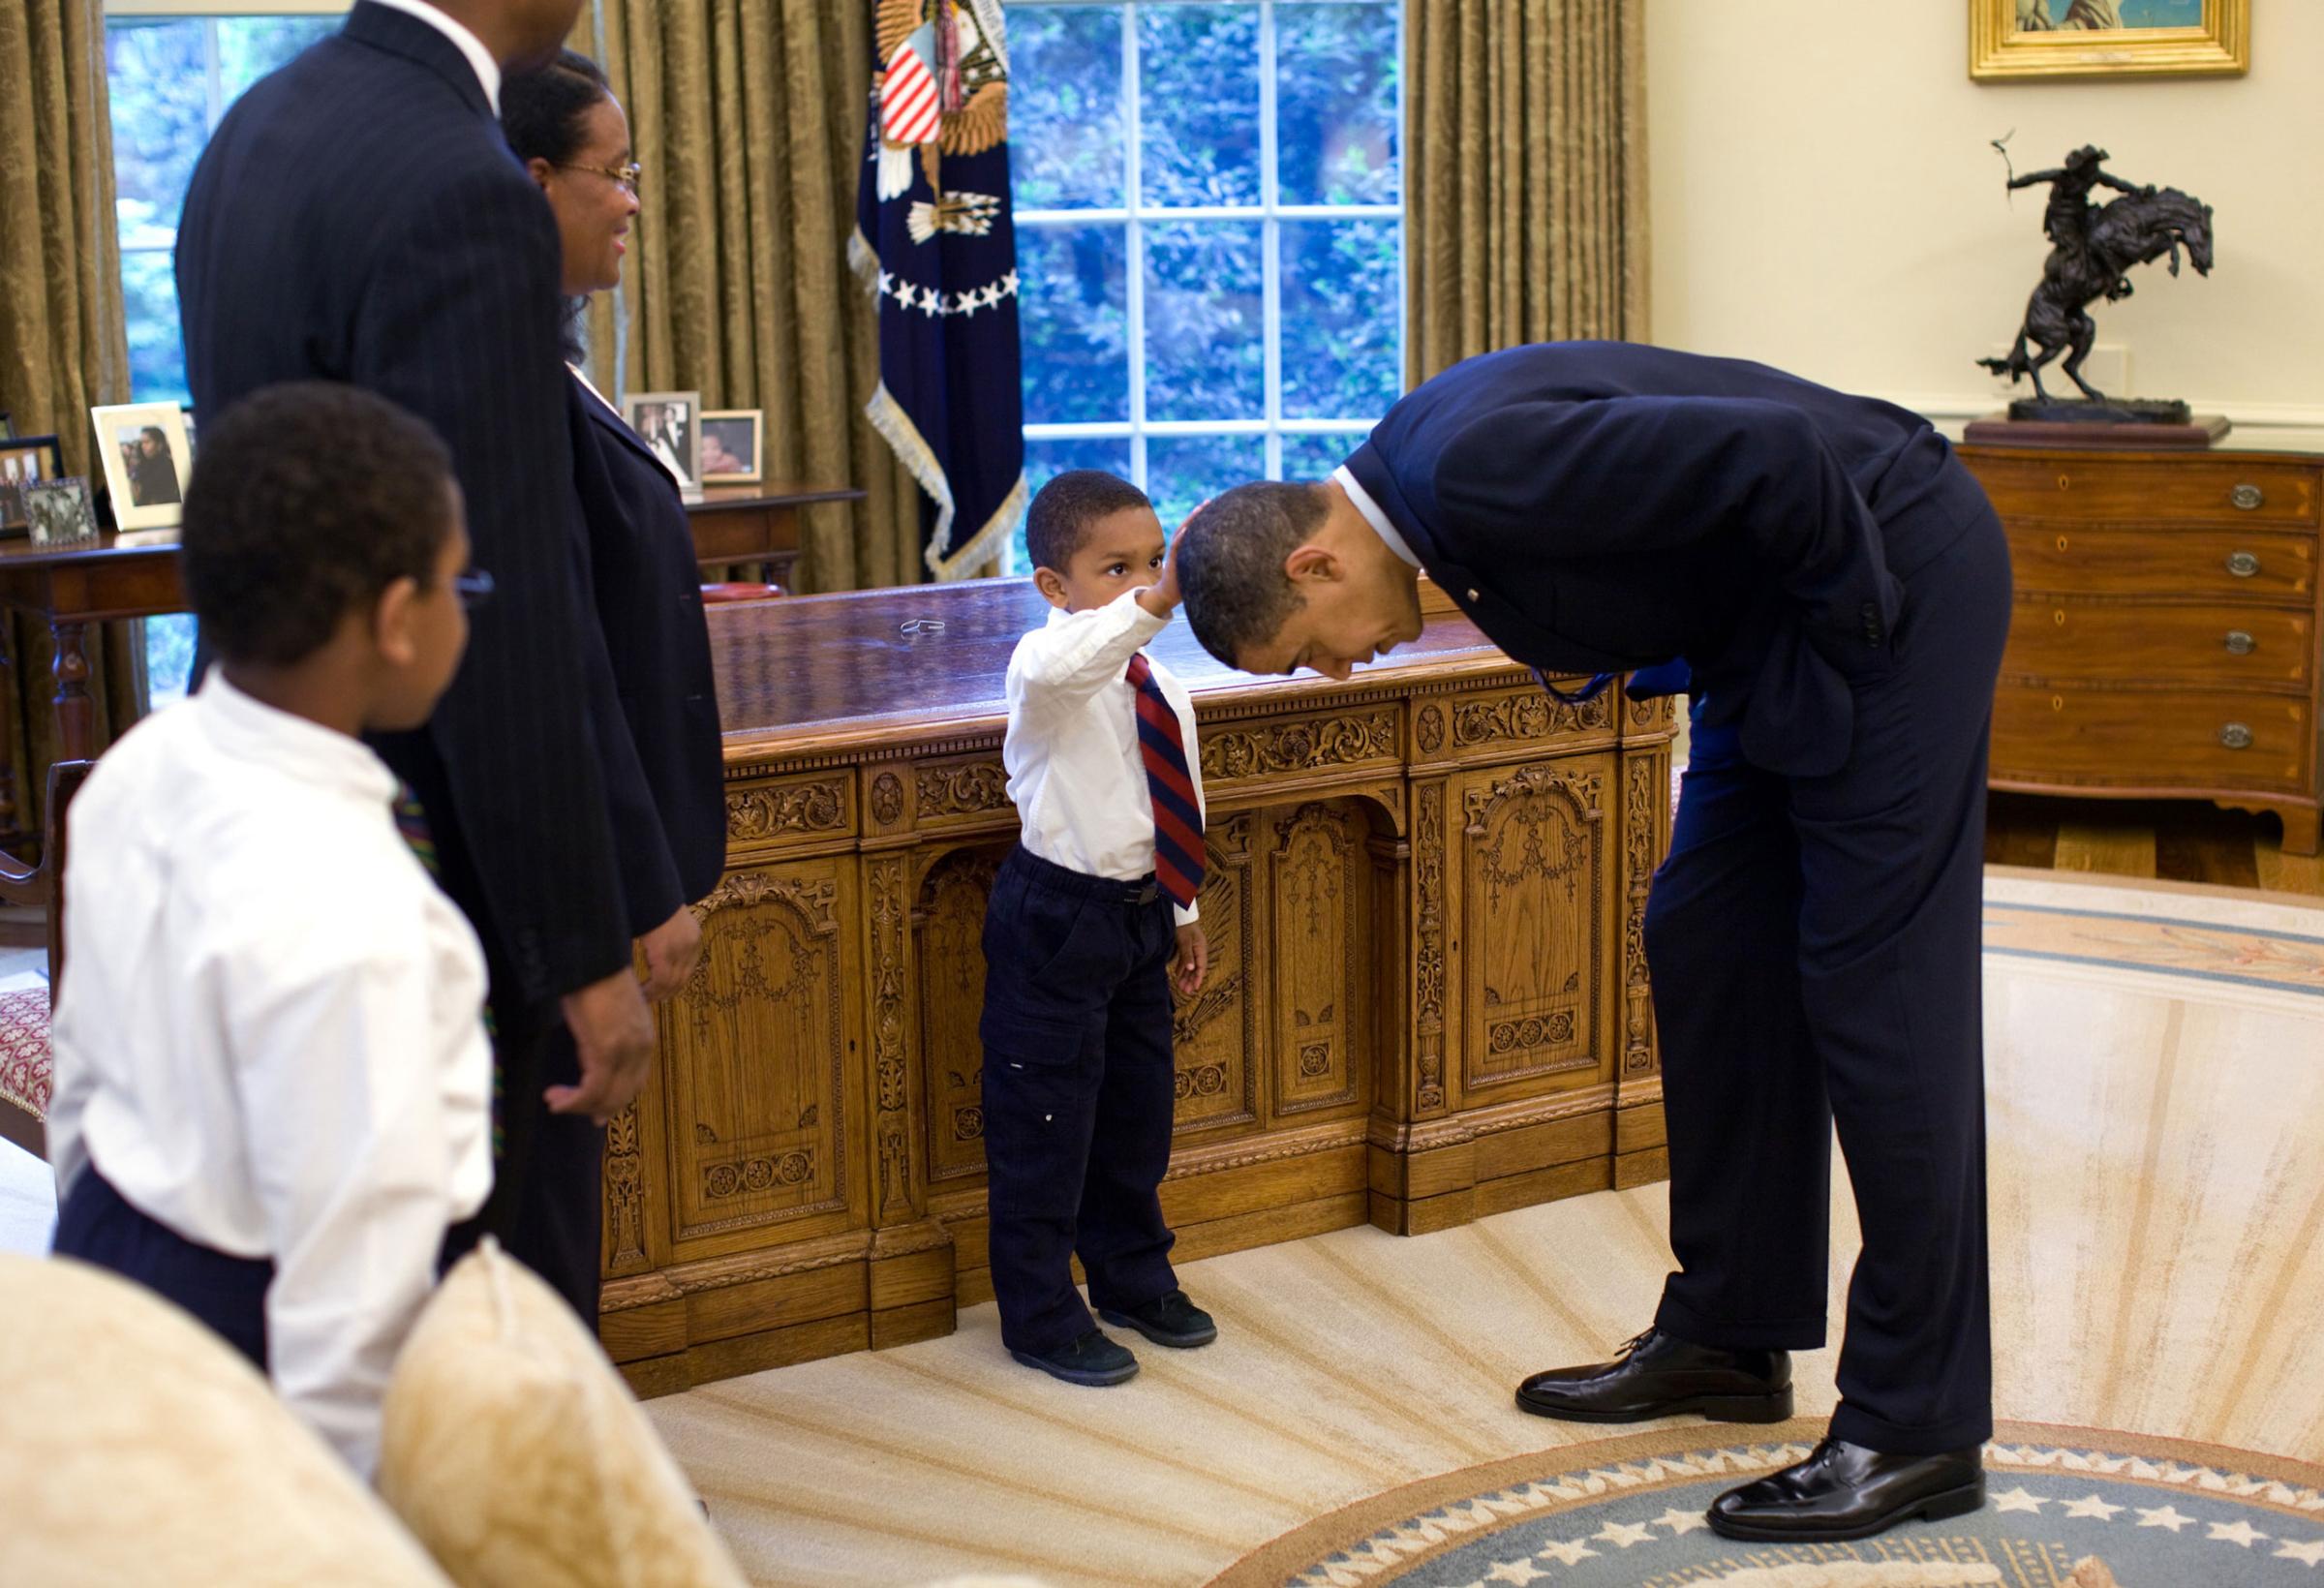 “A National Security staffer, Carlton Philadelphia, brought his family to the Oval Office for a farewell photo with President Obama. Carlton’s son, Jacob, softly told the President he had just gotten a haircut like President Obama, and asked if he could feel the President’s head to see if it felt the same as his.”